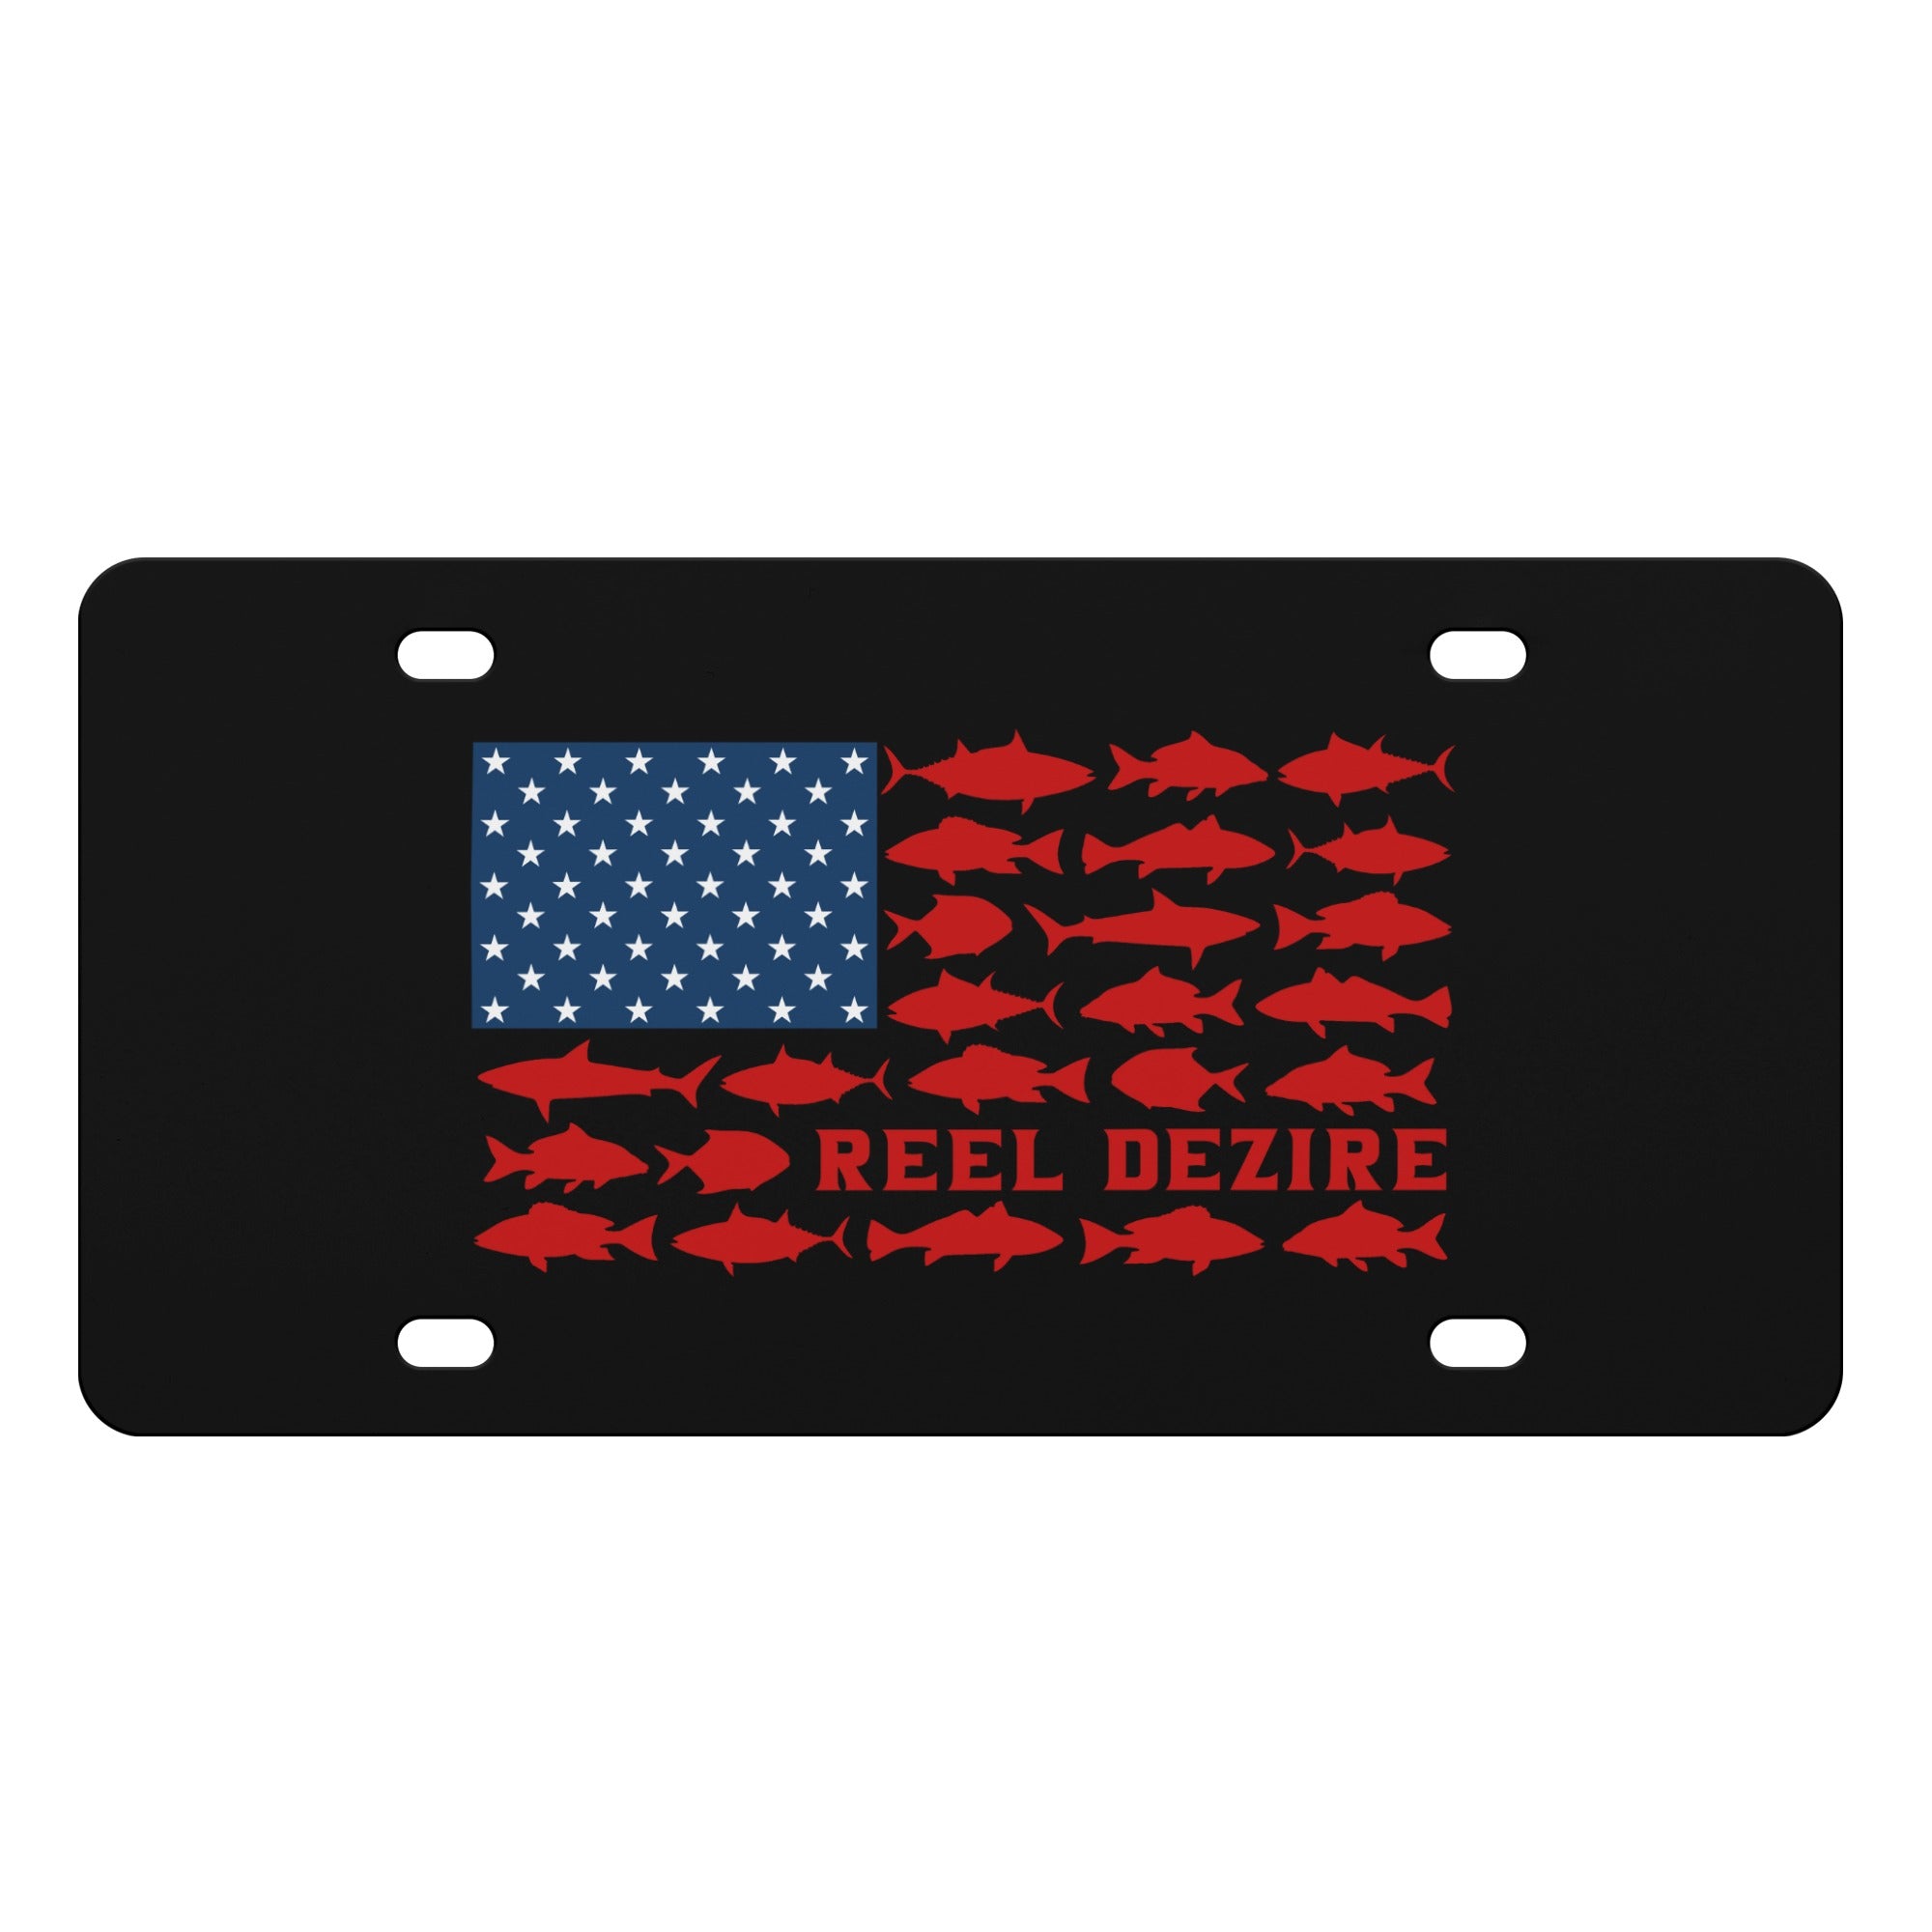 License Plates – Tagged License Plates – ReelDezire